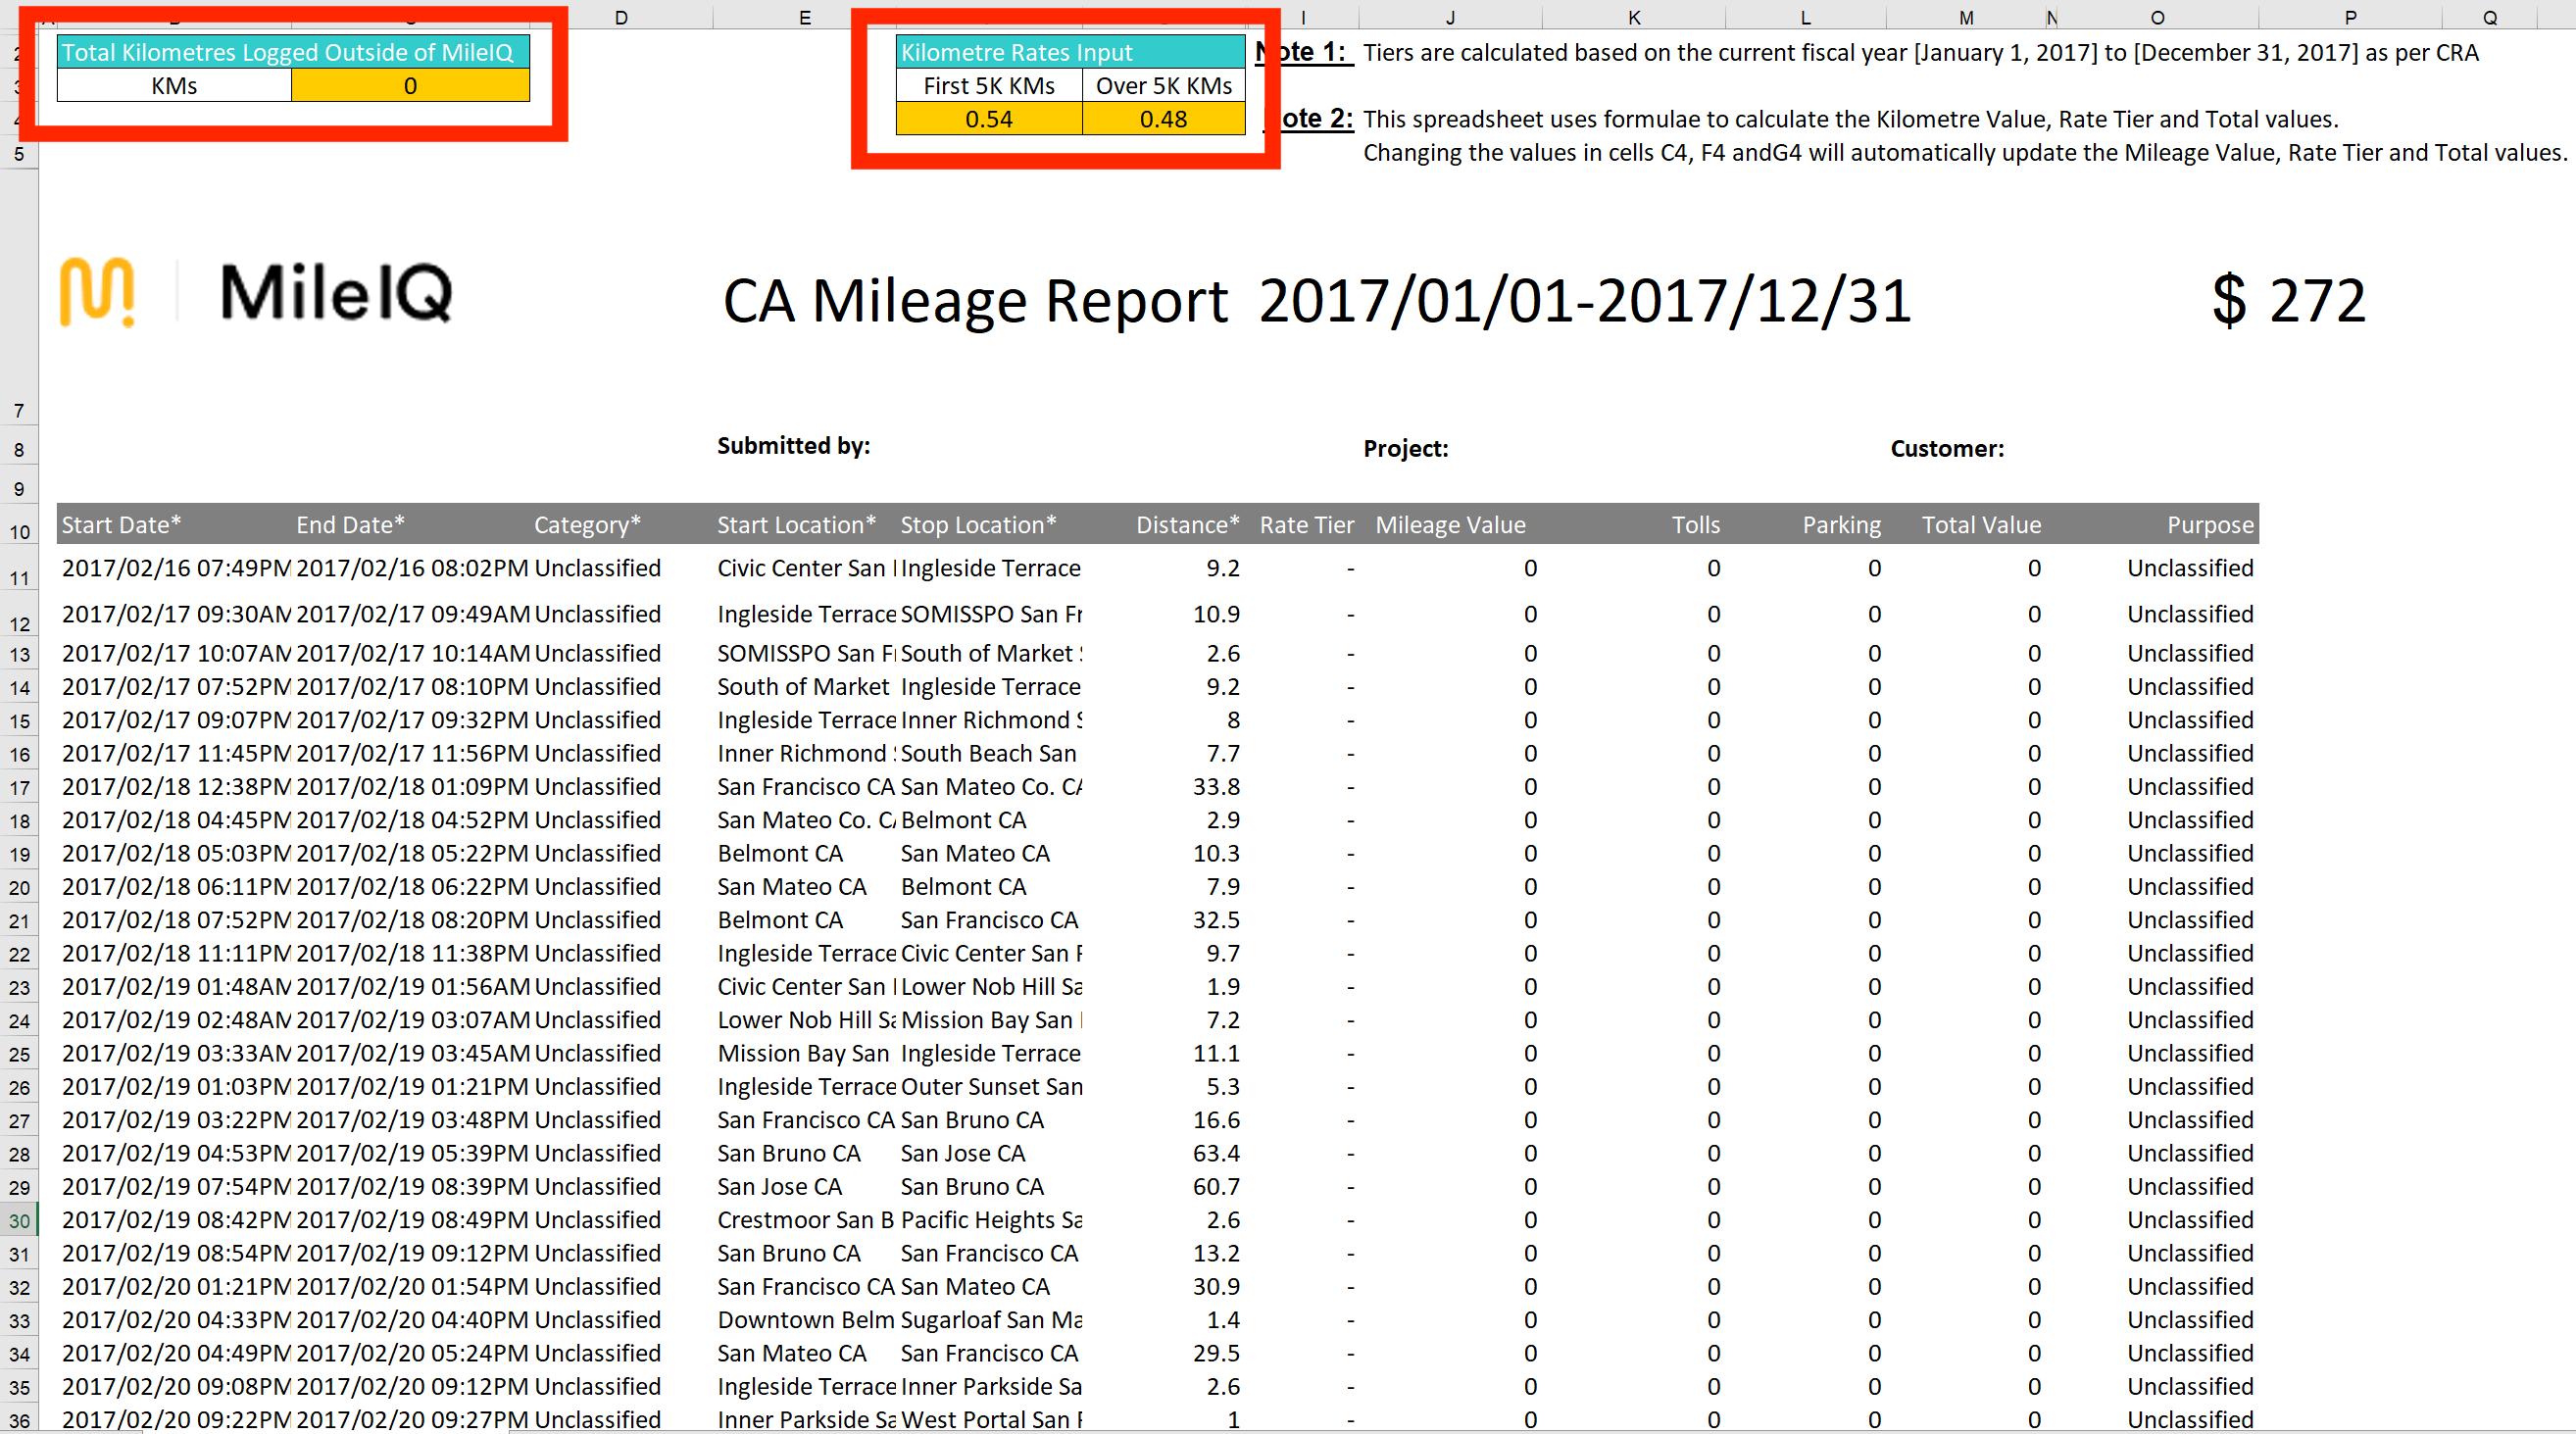 This image shows the Tiered Report in XLS, highlighting the Total Kilometers Logged Outside of MileIQ input table.